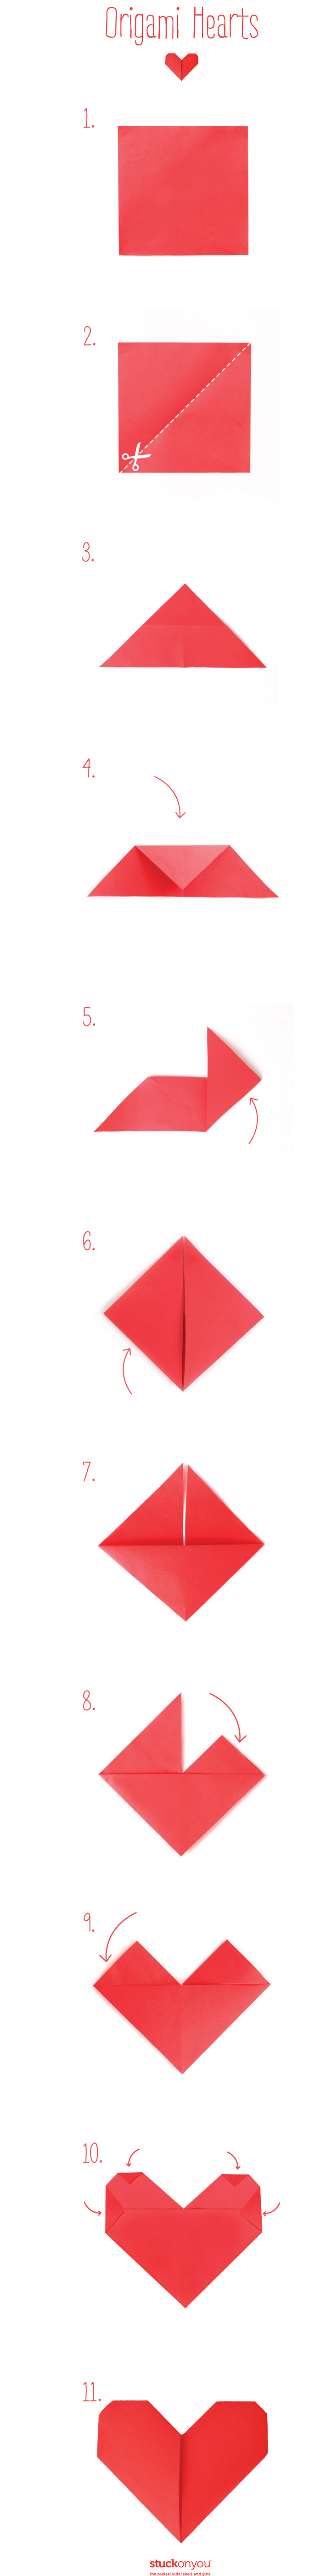 How To Do A Heart Origami How To Make Origami Hearts Stuck On You